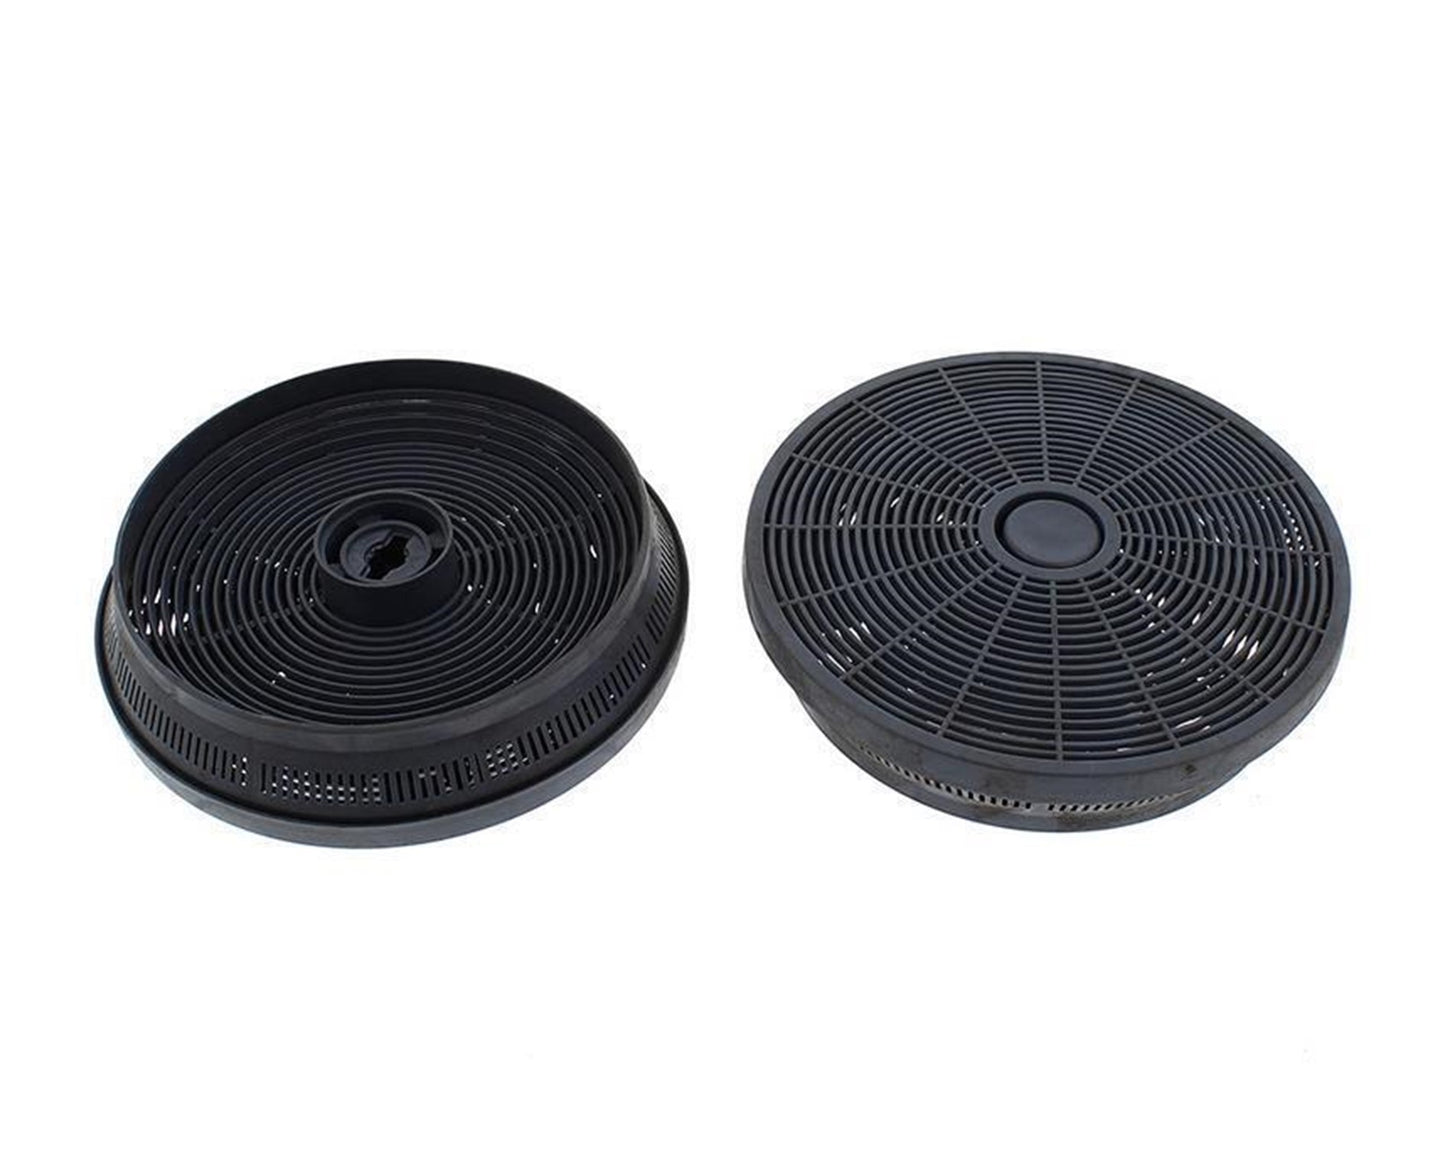 2 Pack Charcoal Carbon Cooker Hood Grease Filters for Belling 444441130, 444443284, 444447262 - 082620630